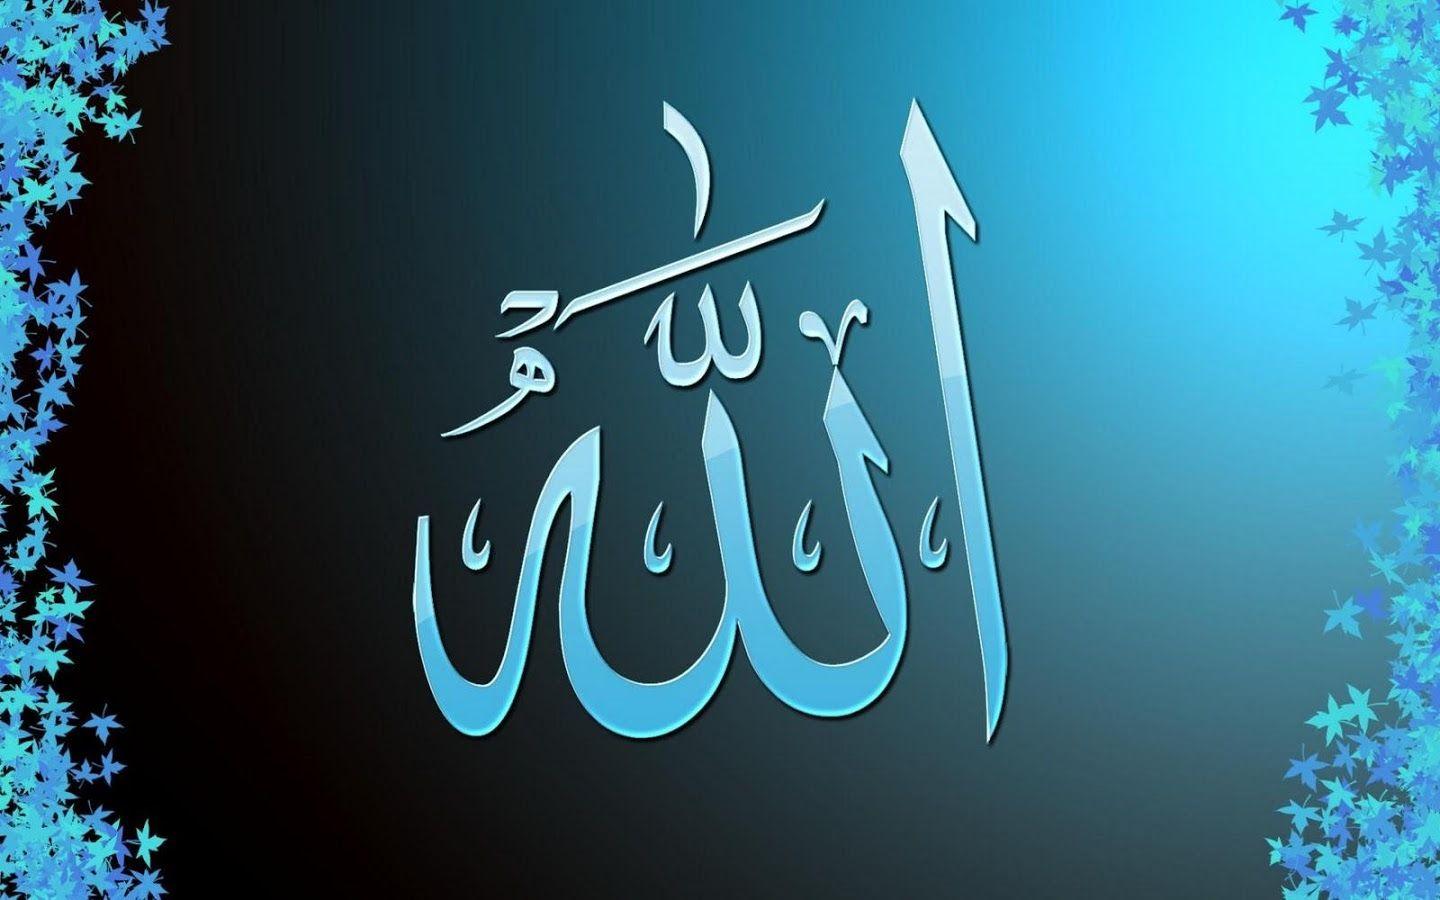 Allah Live Wallpaper Apps on Google Play